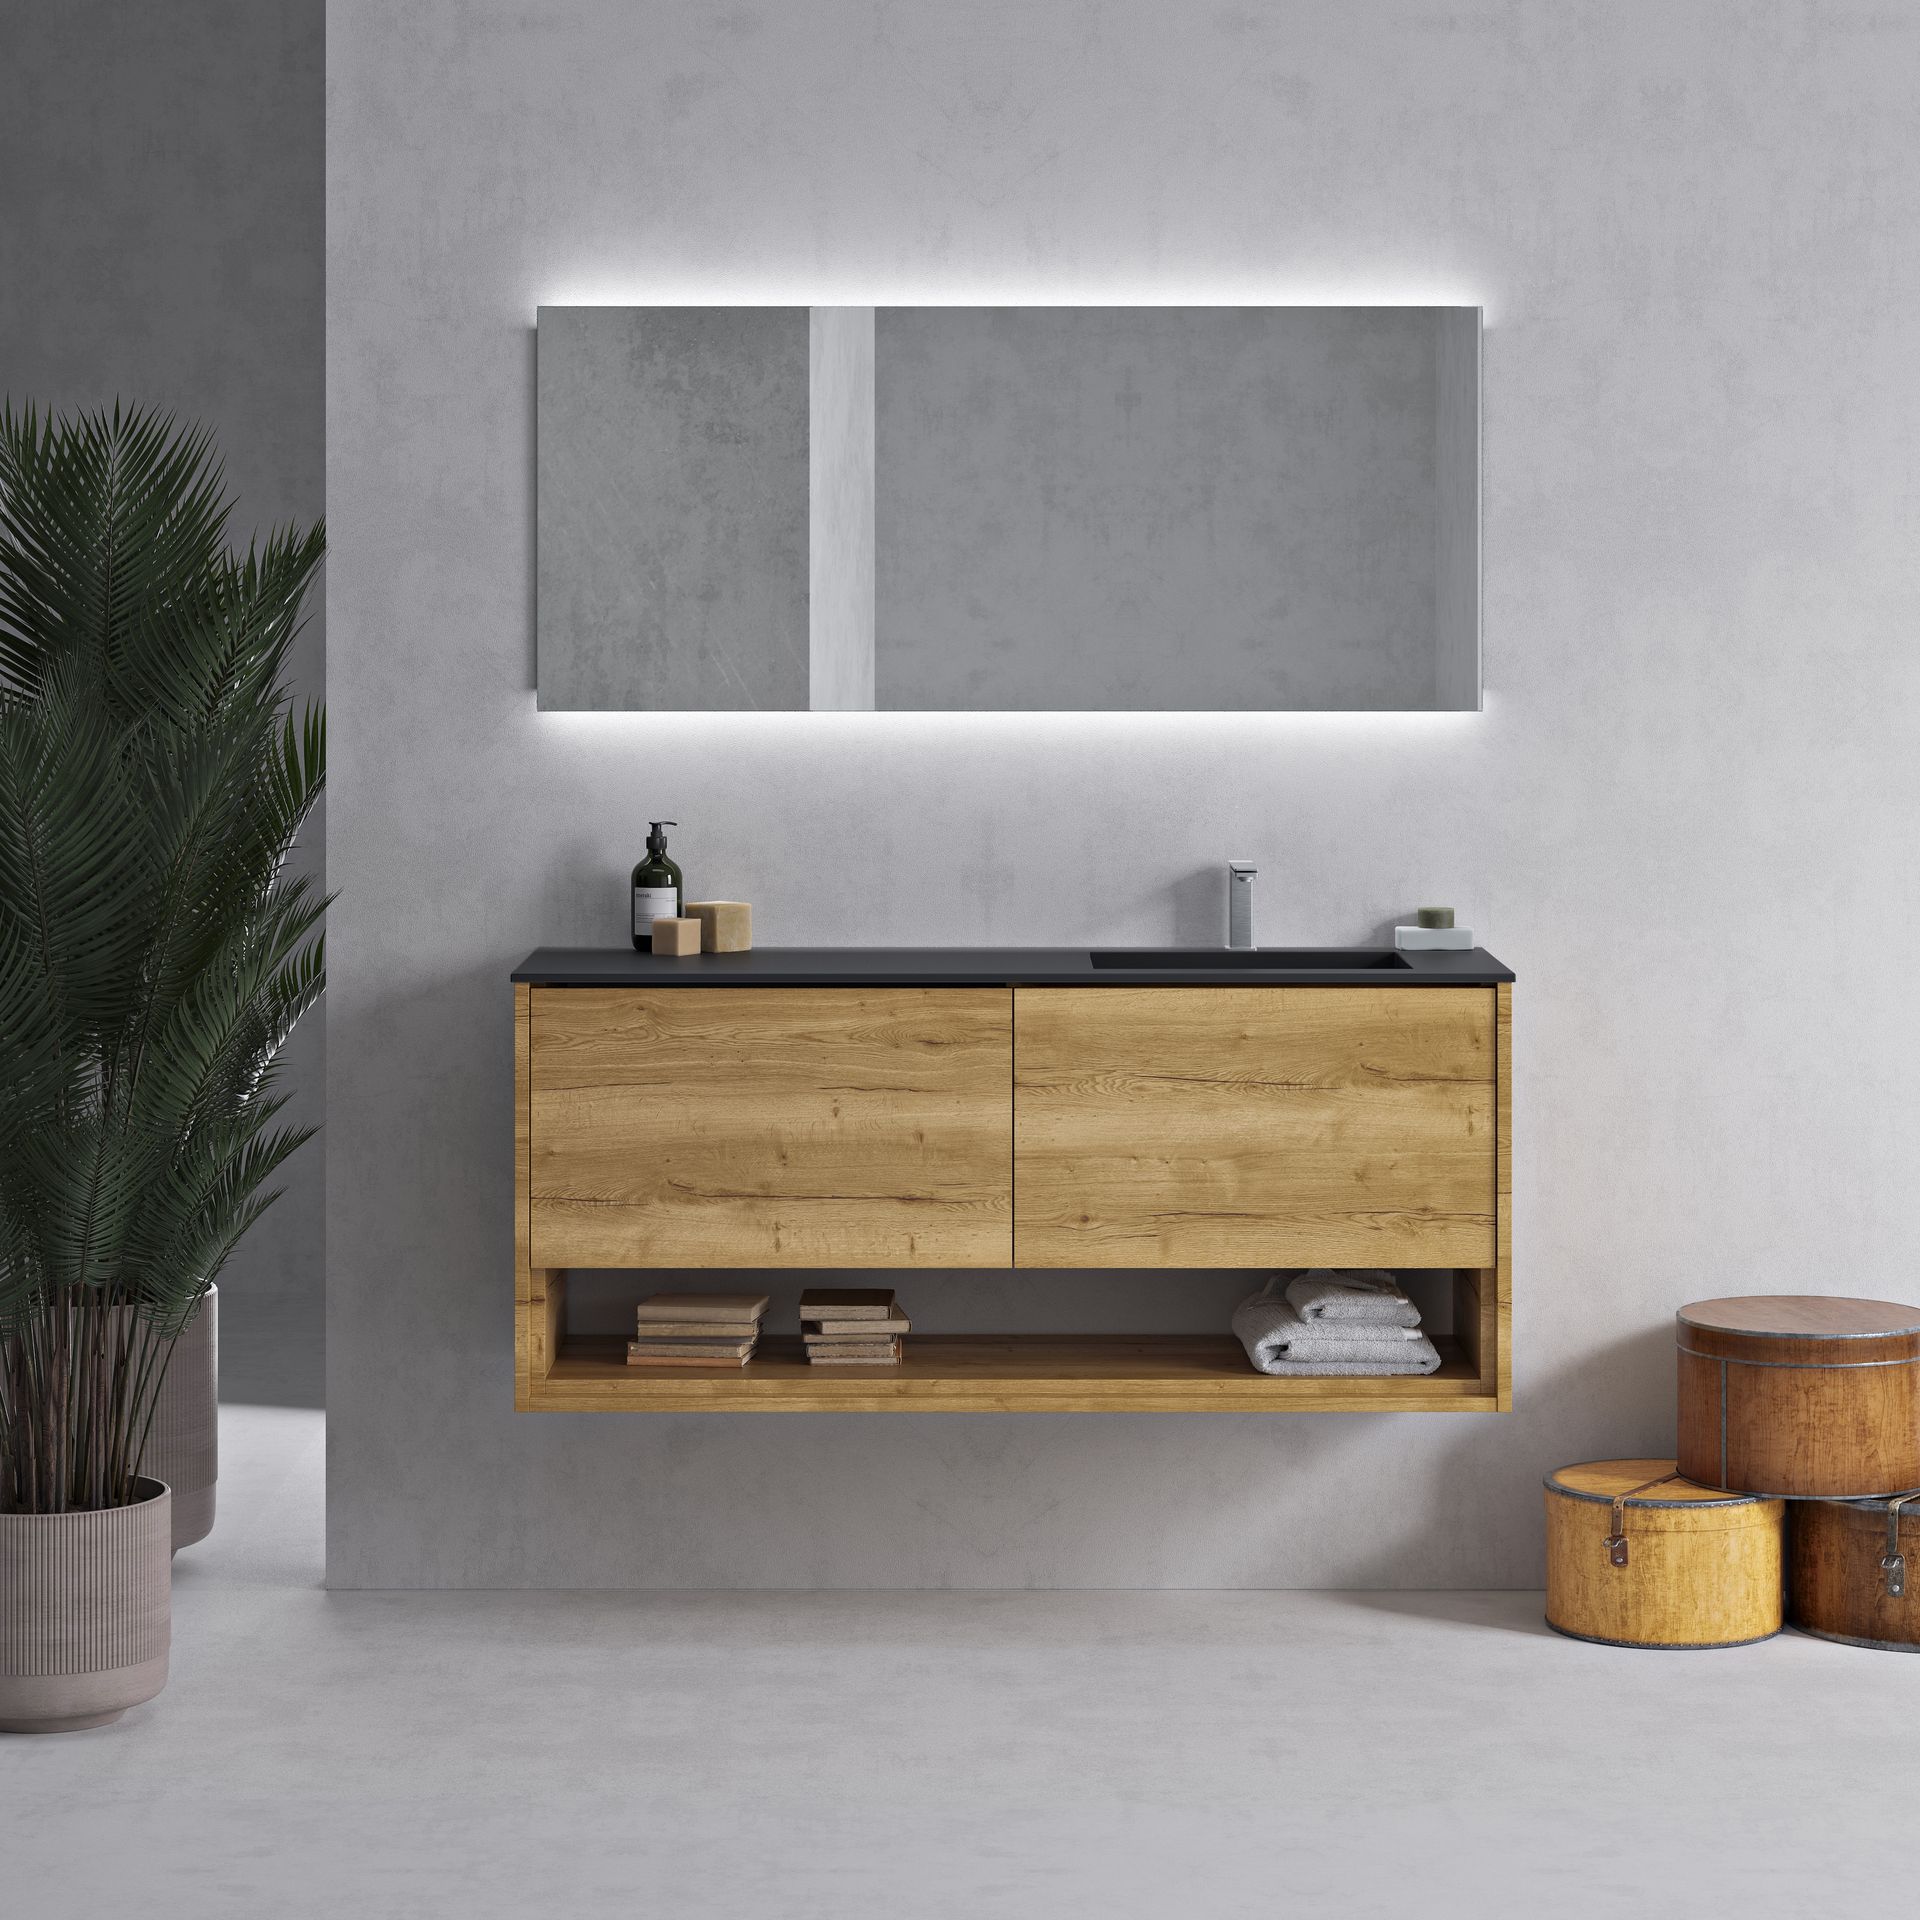 Tennessee Corian® Colour Basin + Athena Wood Solid Oak Vanity Unit - 2 drawers